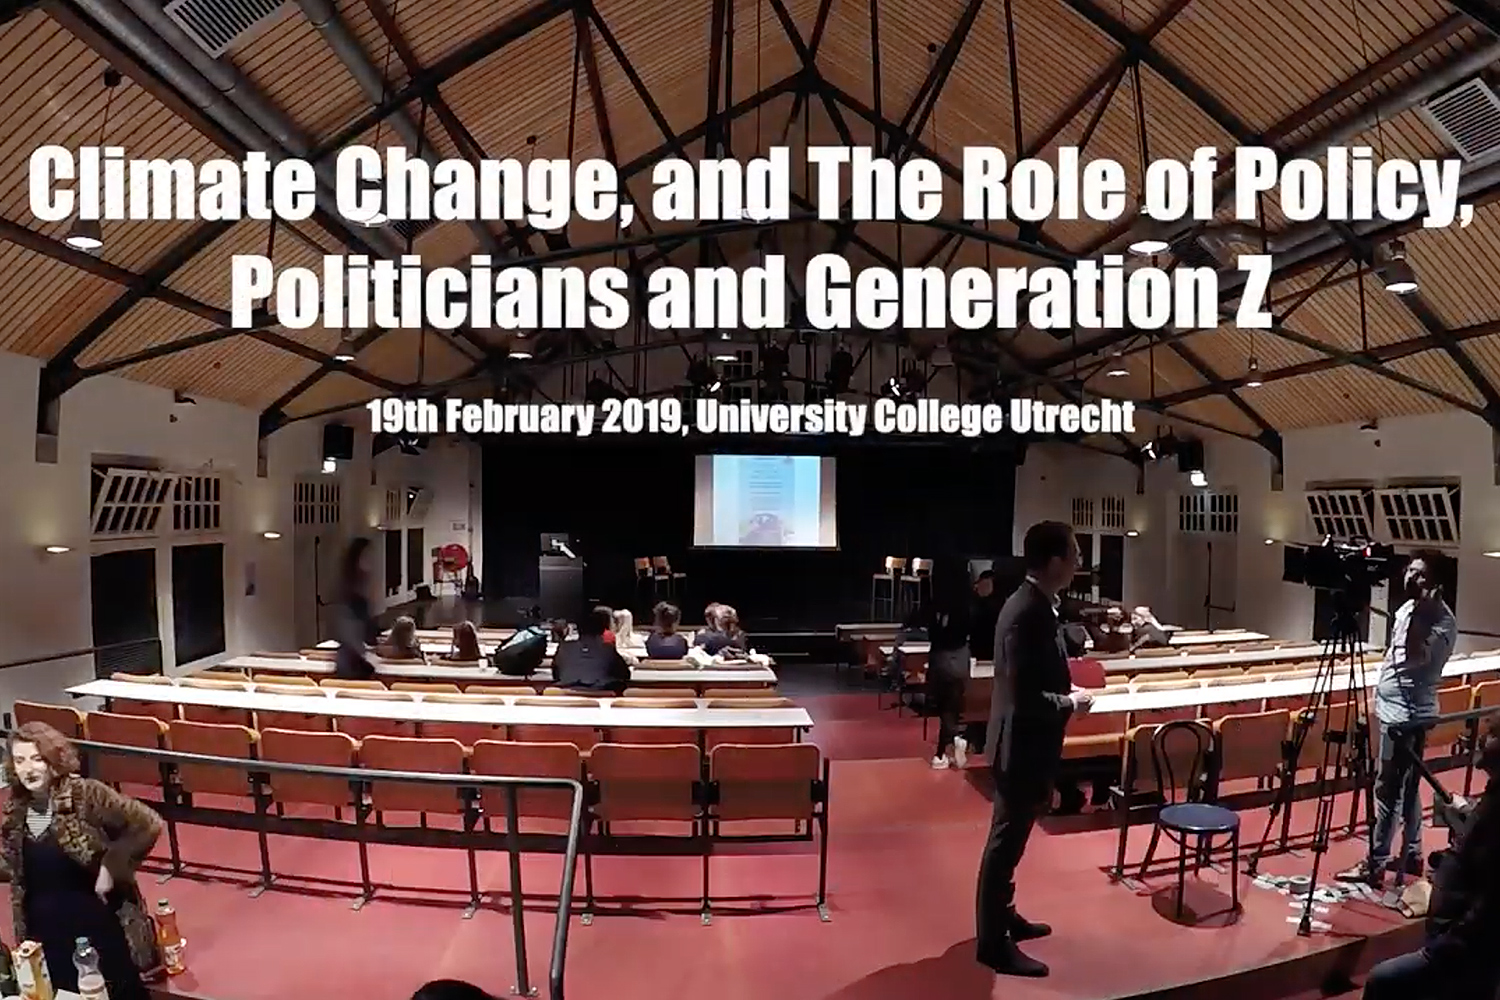 Video of Liberal Green event at University College Utrecht